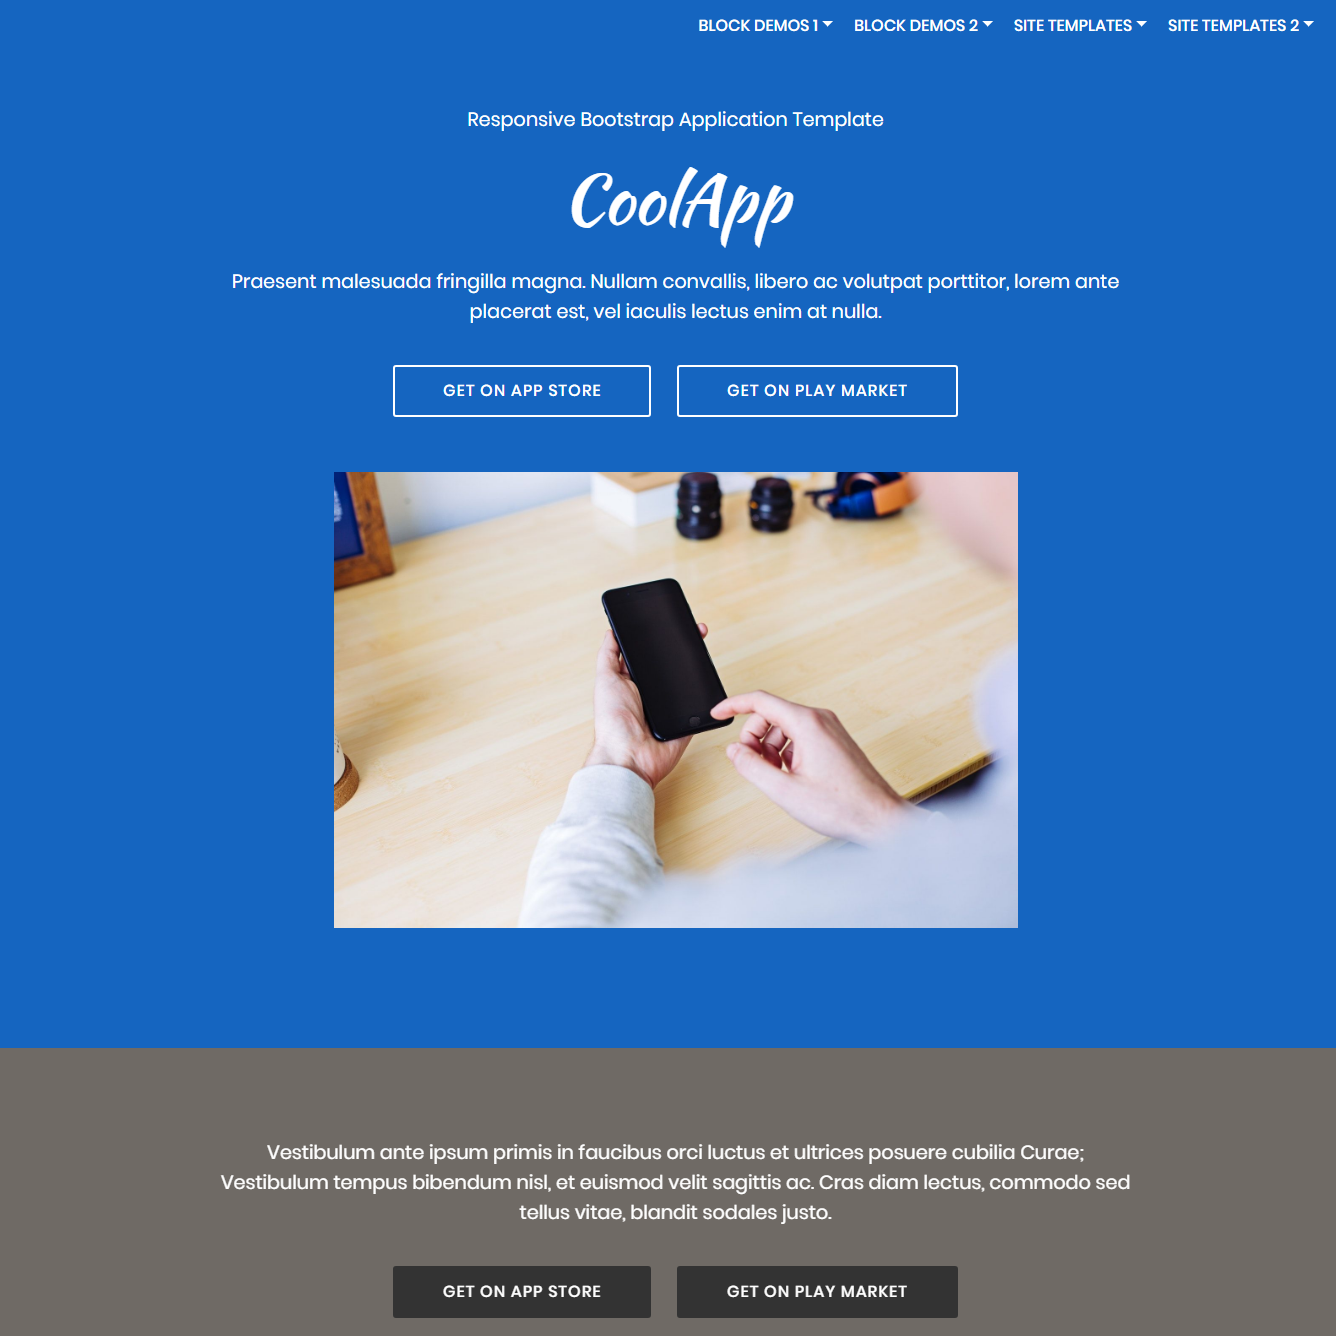 Responsive Bootstrap Application Themes